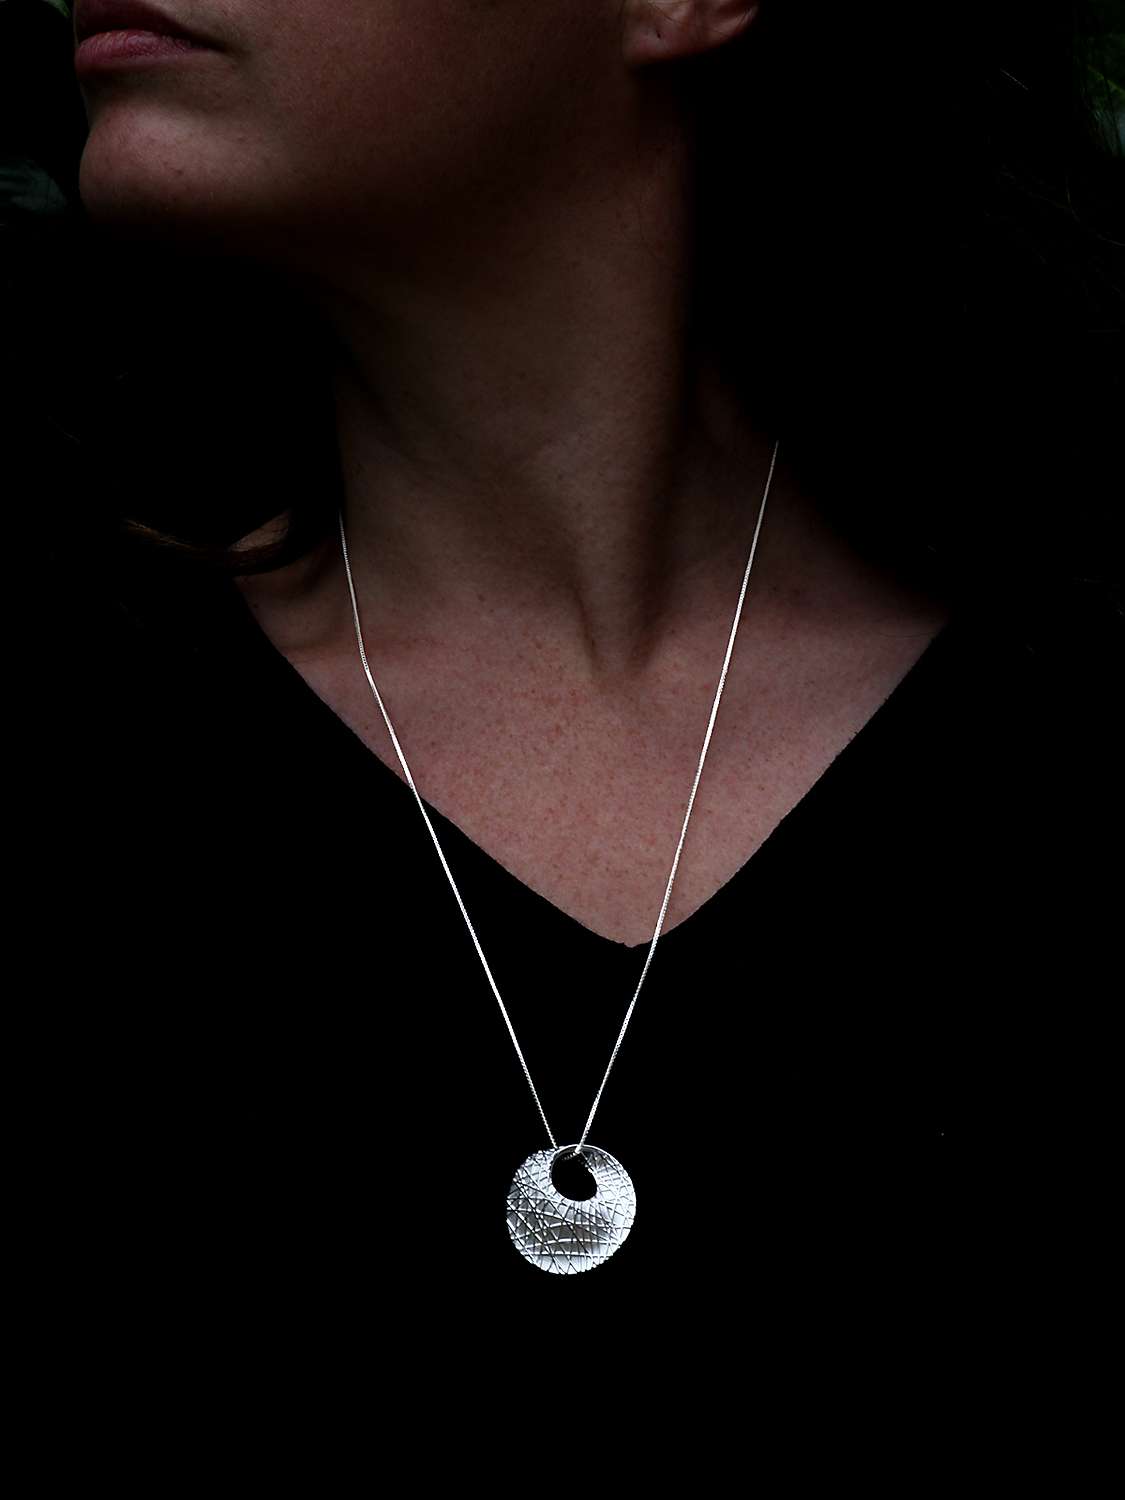 Buy Nina B Textured Mobious Round Pendant Necklace, Silver Online at johnlewis.com